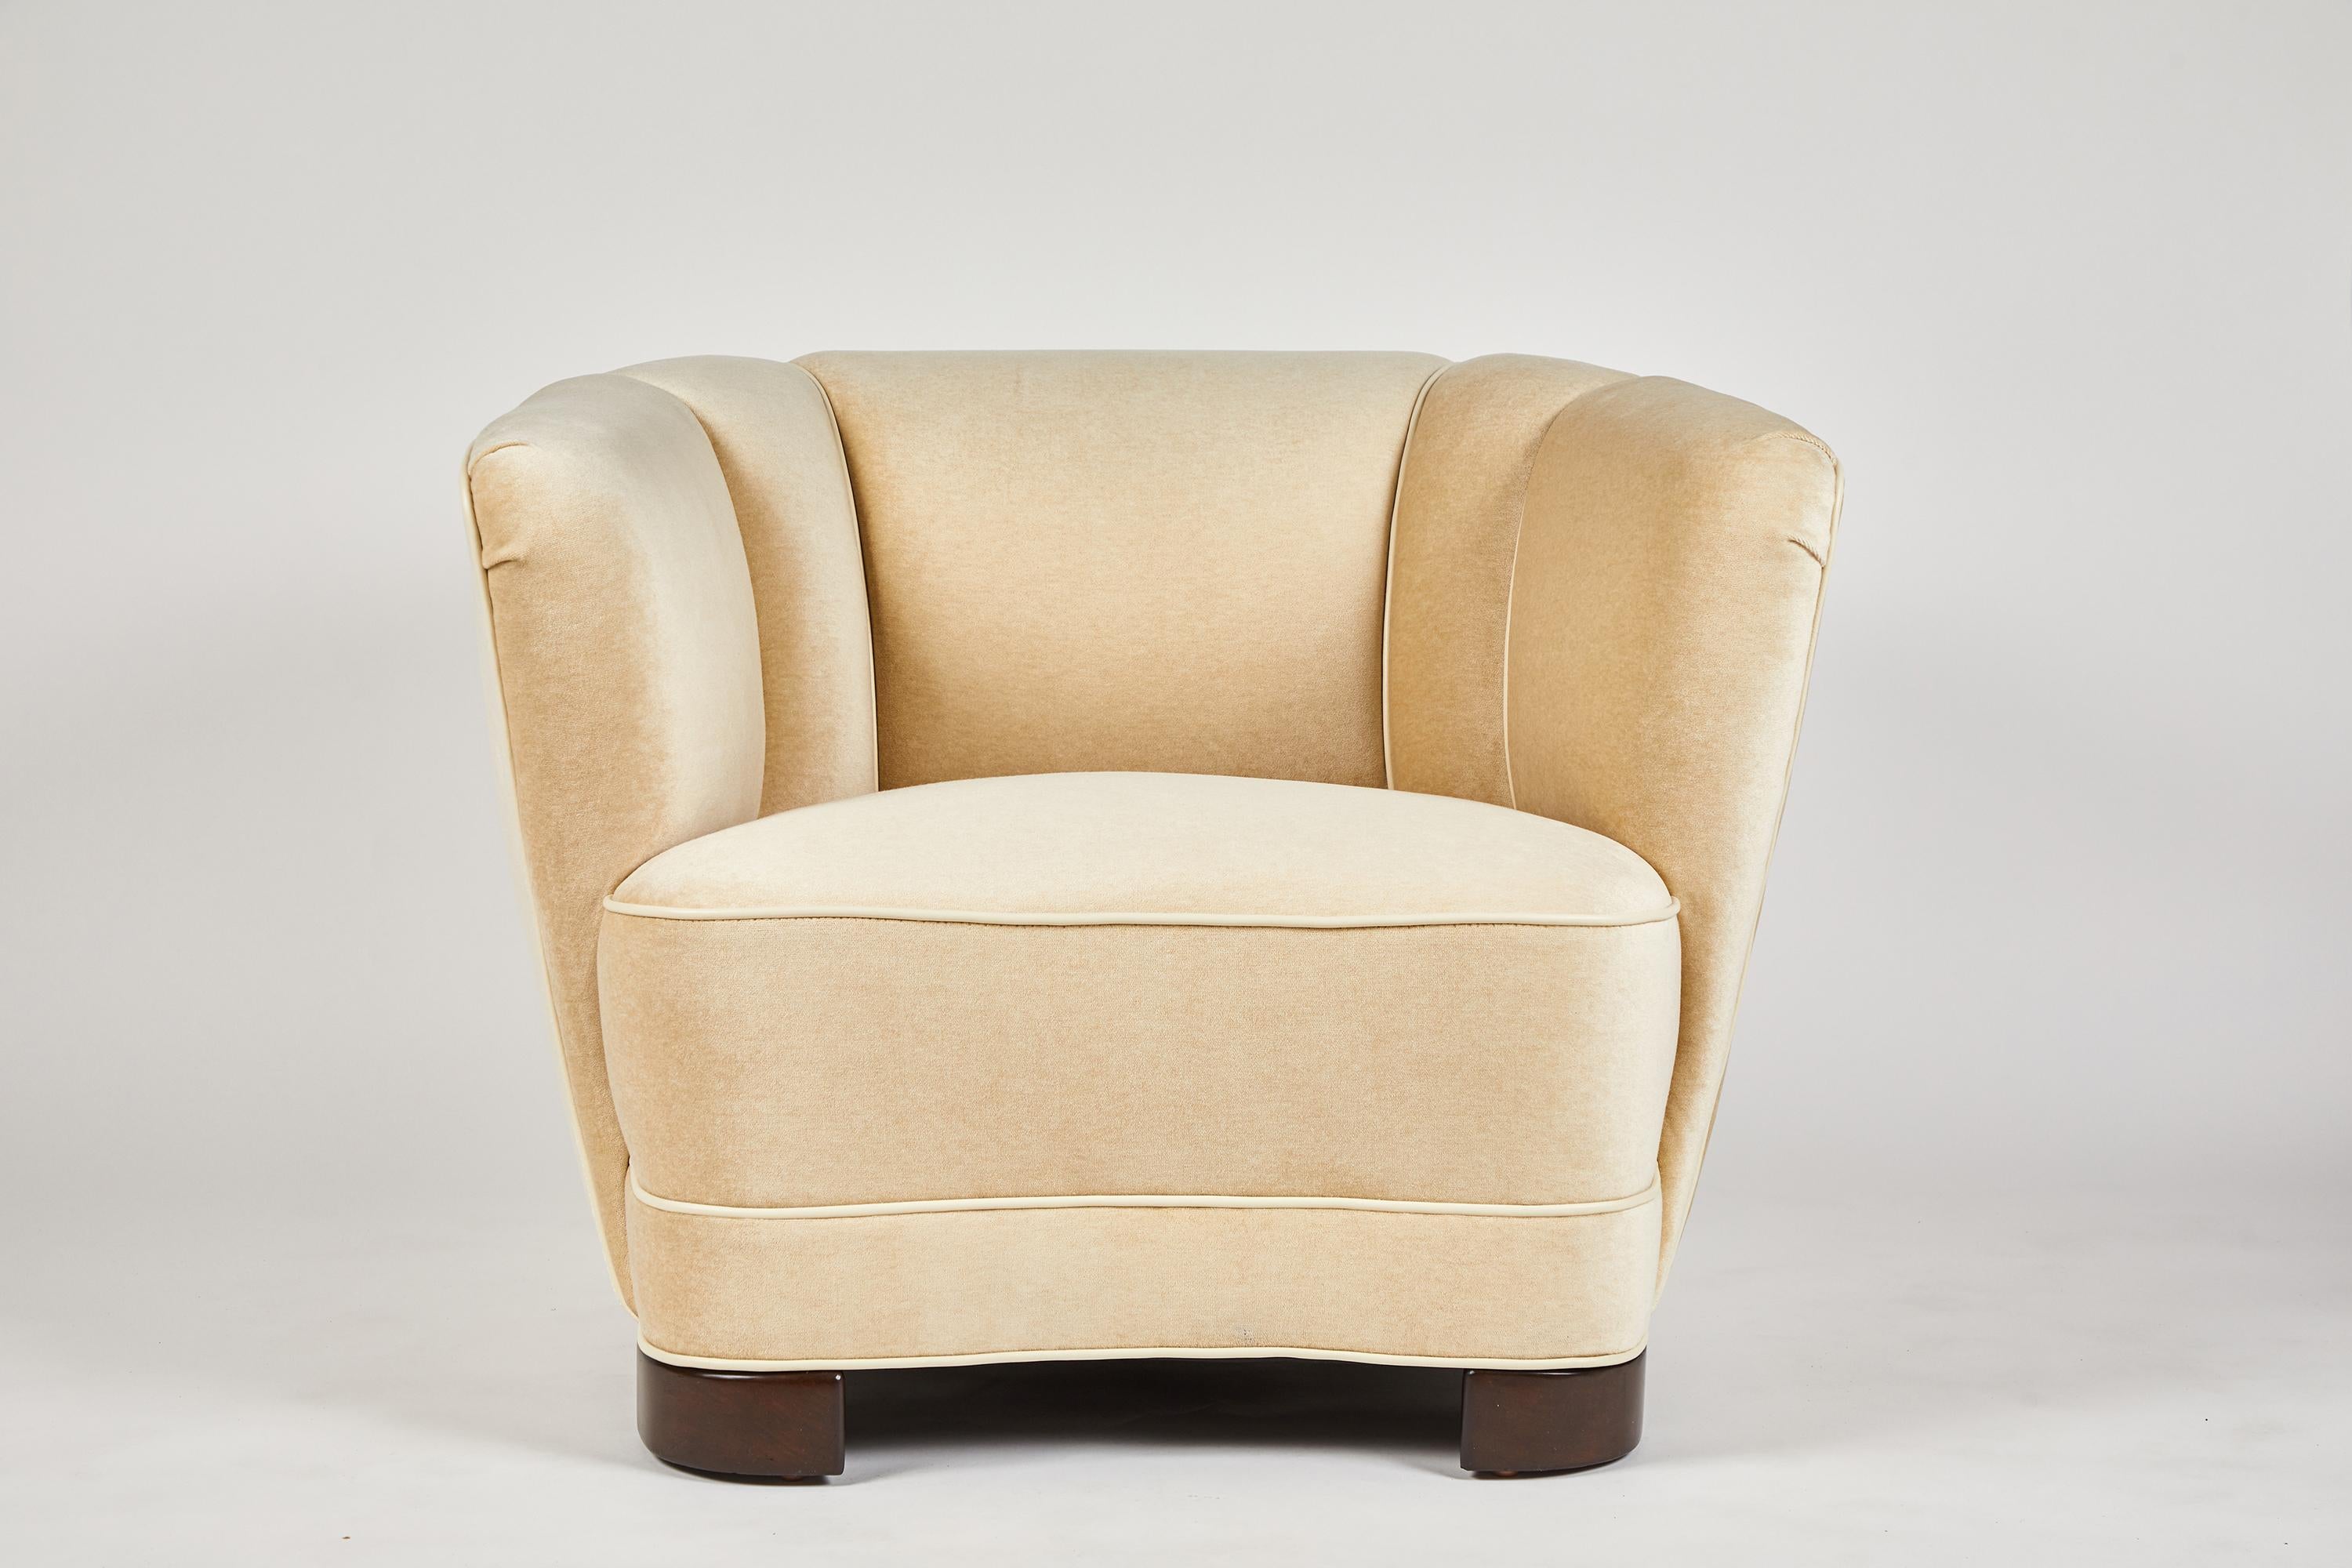 Sutton Place Club Chair by Dragonette Private Label 4